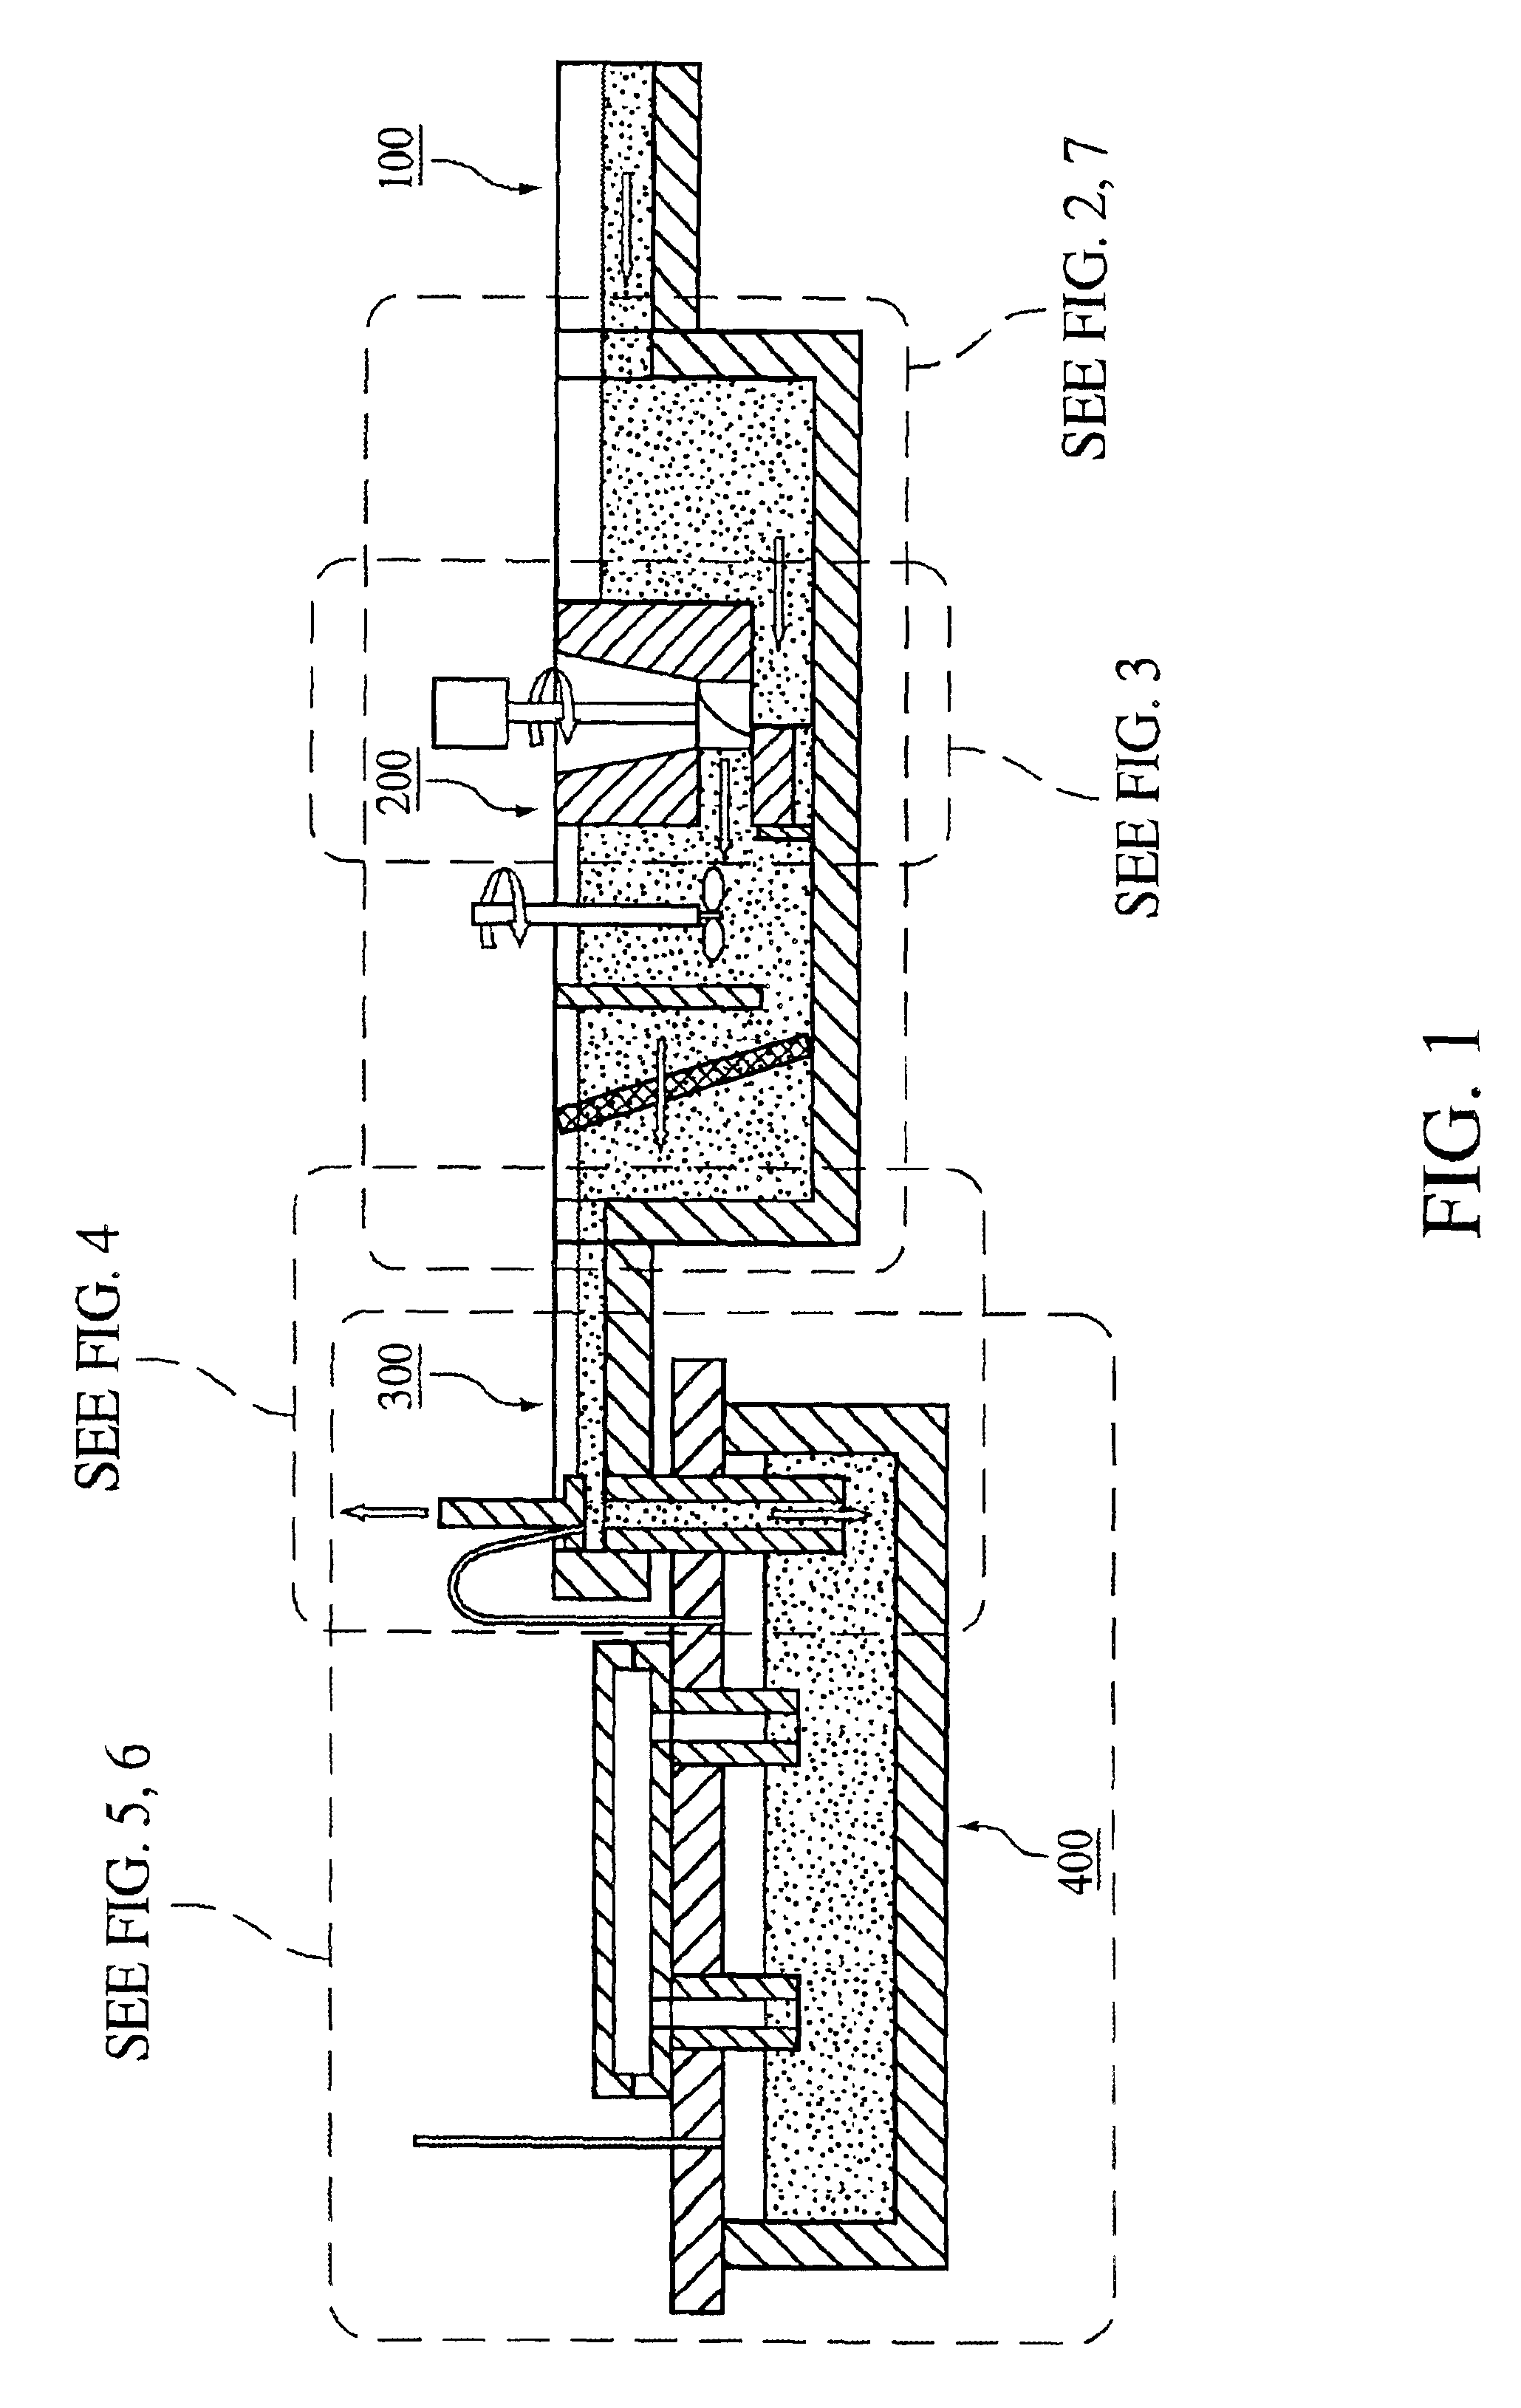 Overflow transfer furnace and control system for reduced oxide production in a casting furnace